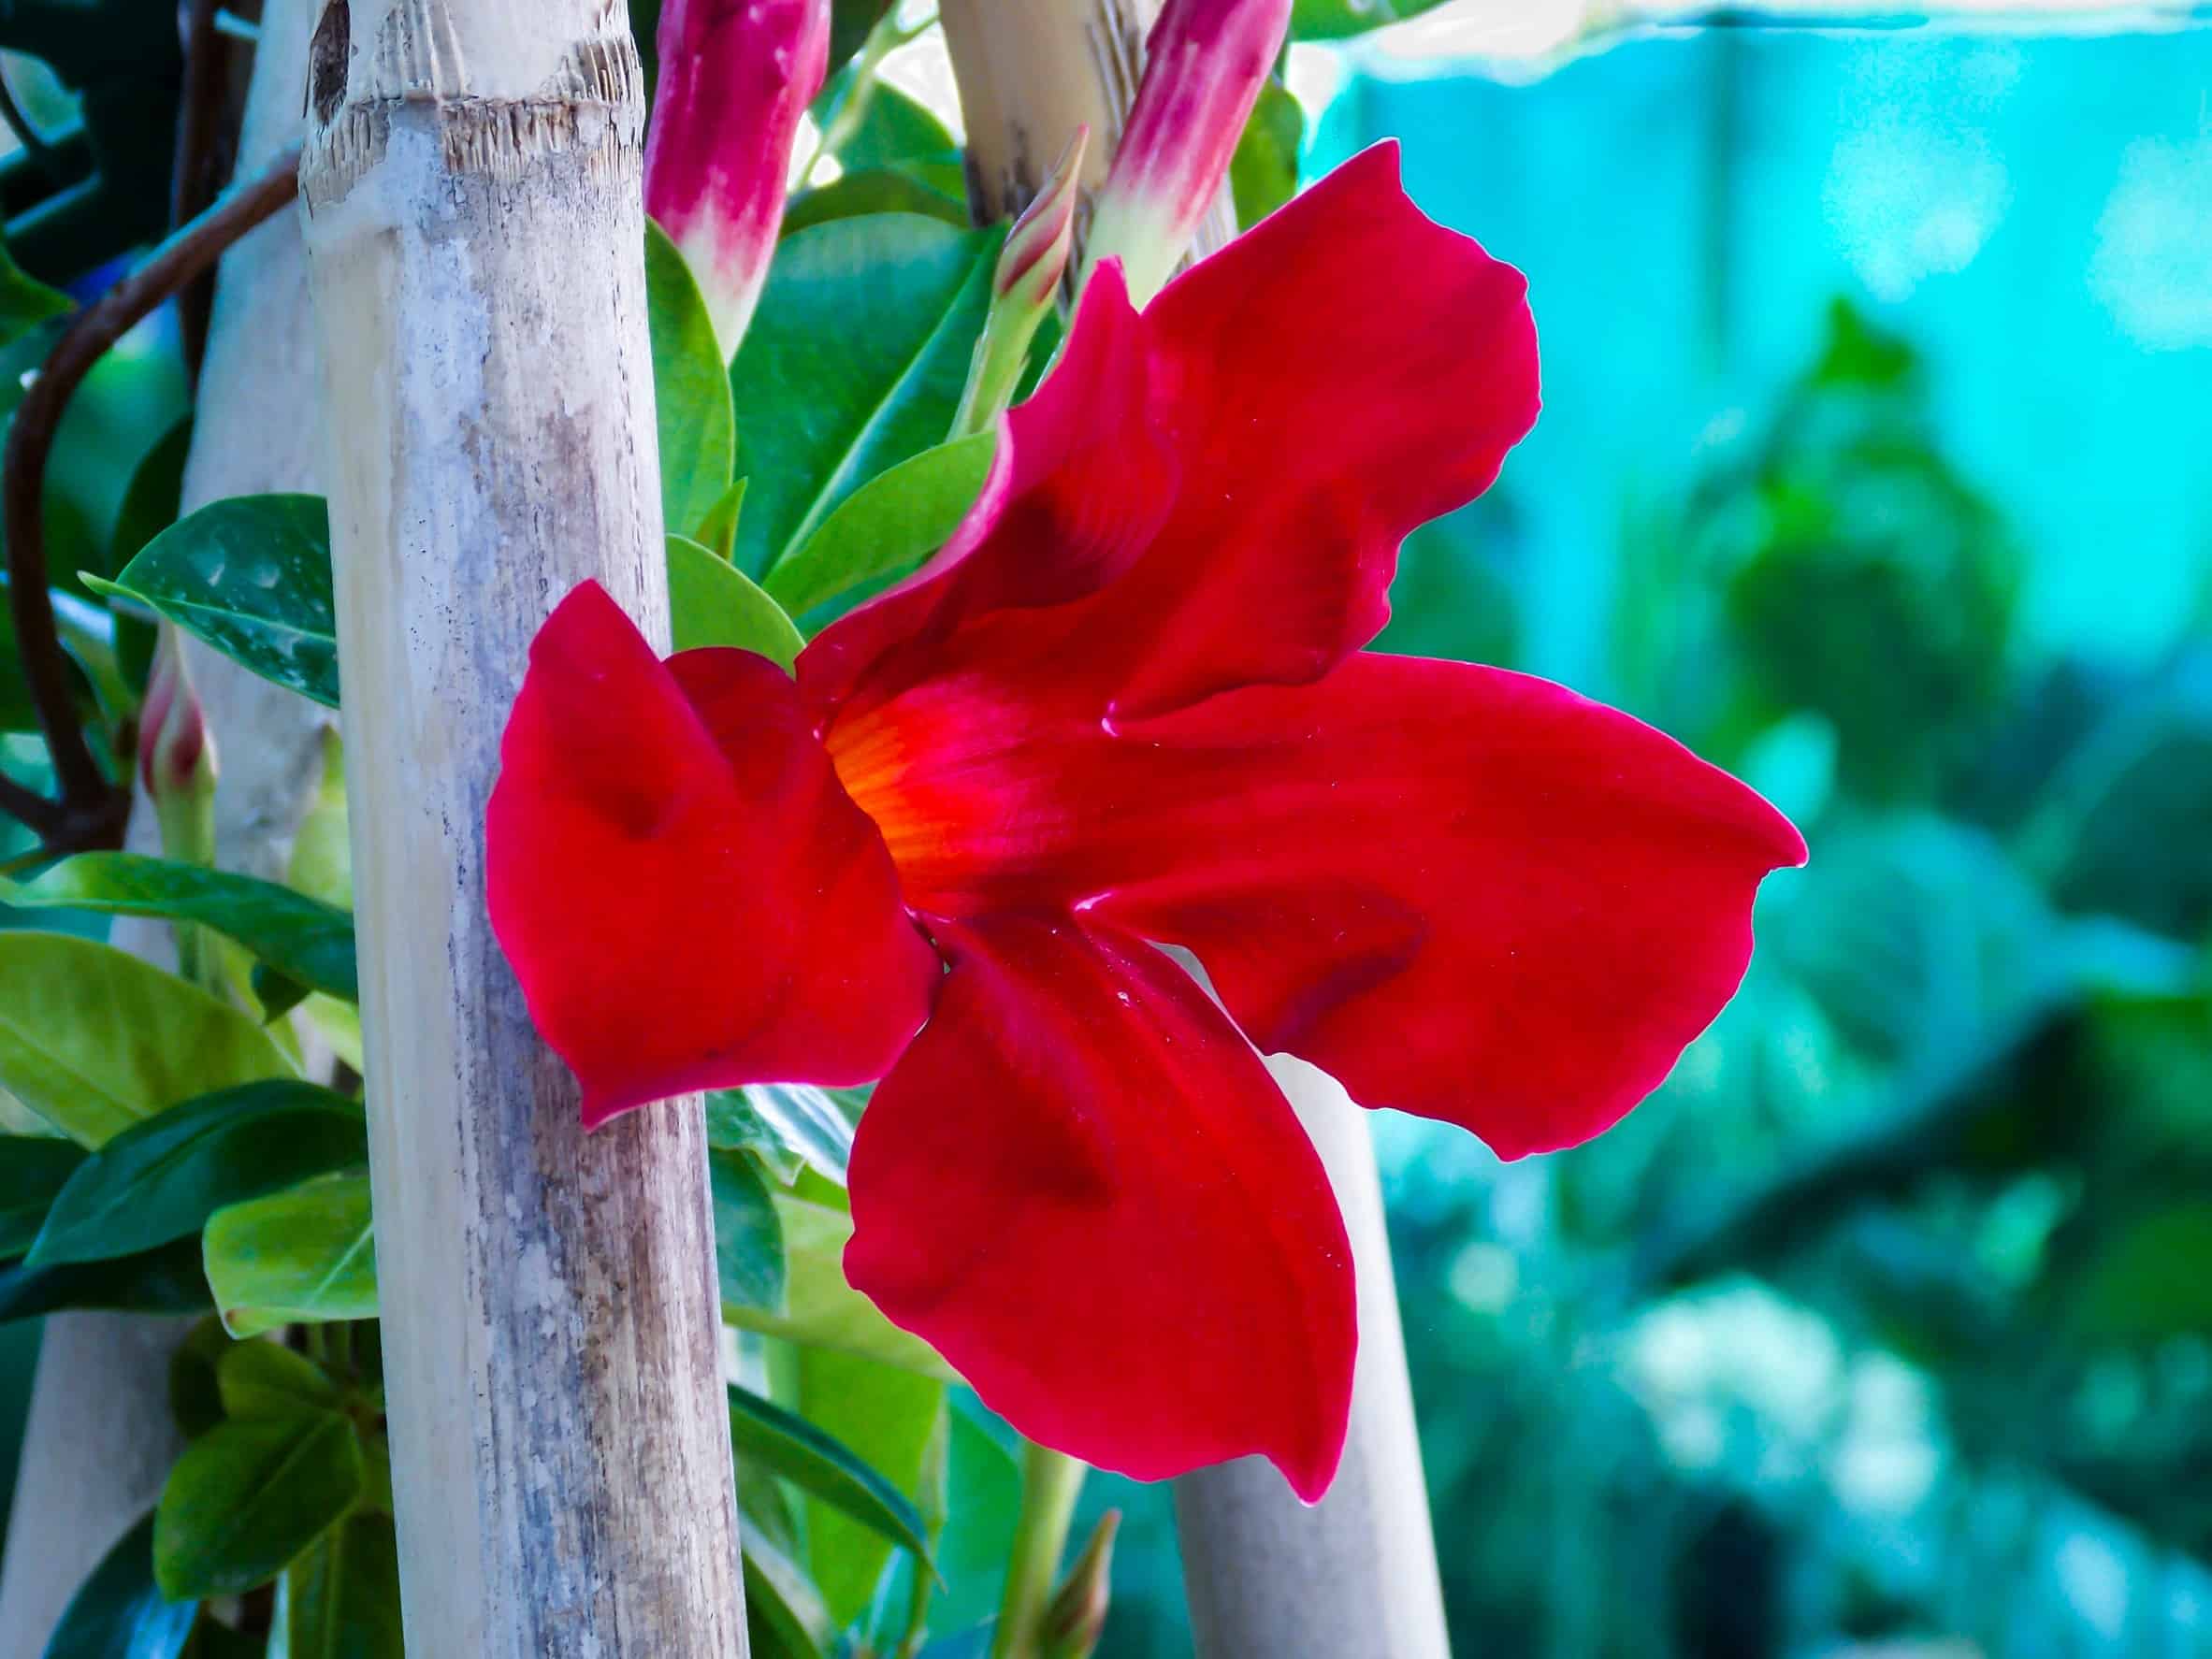 Mandevilla is a tropical vine whose flowers look like hibiscus.